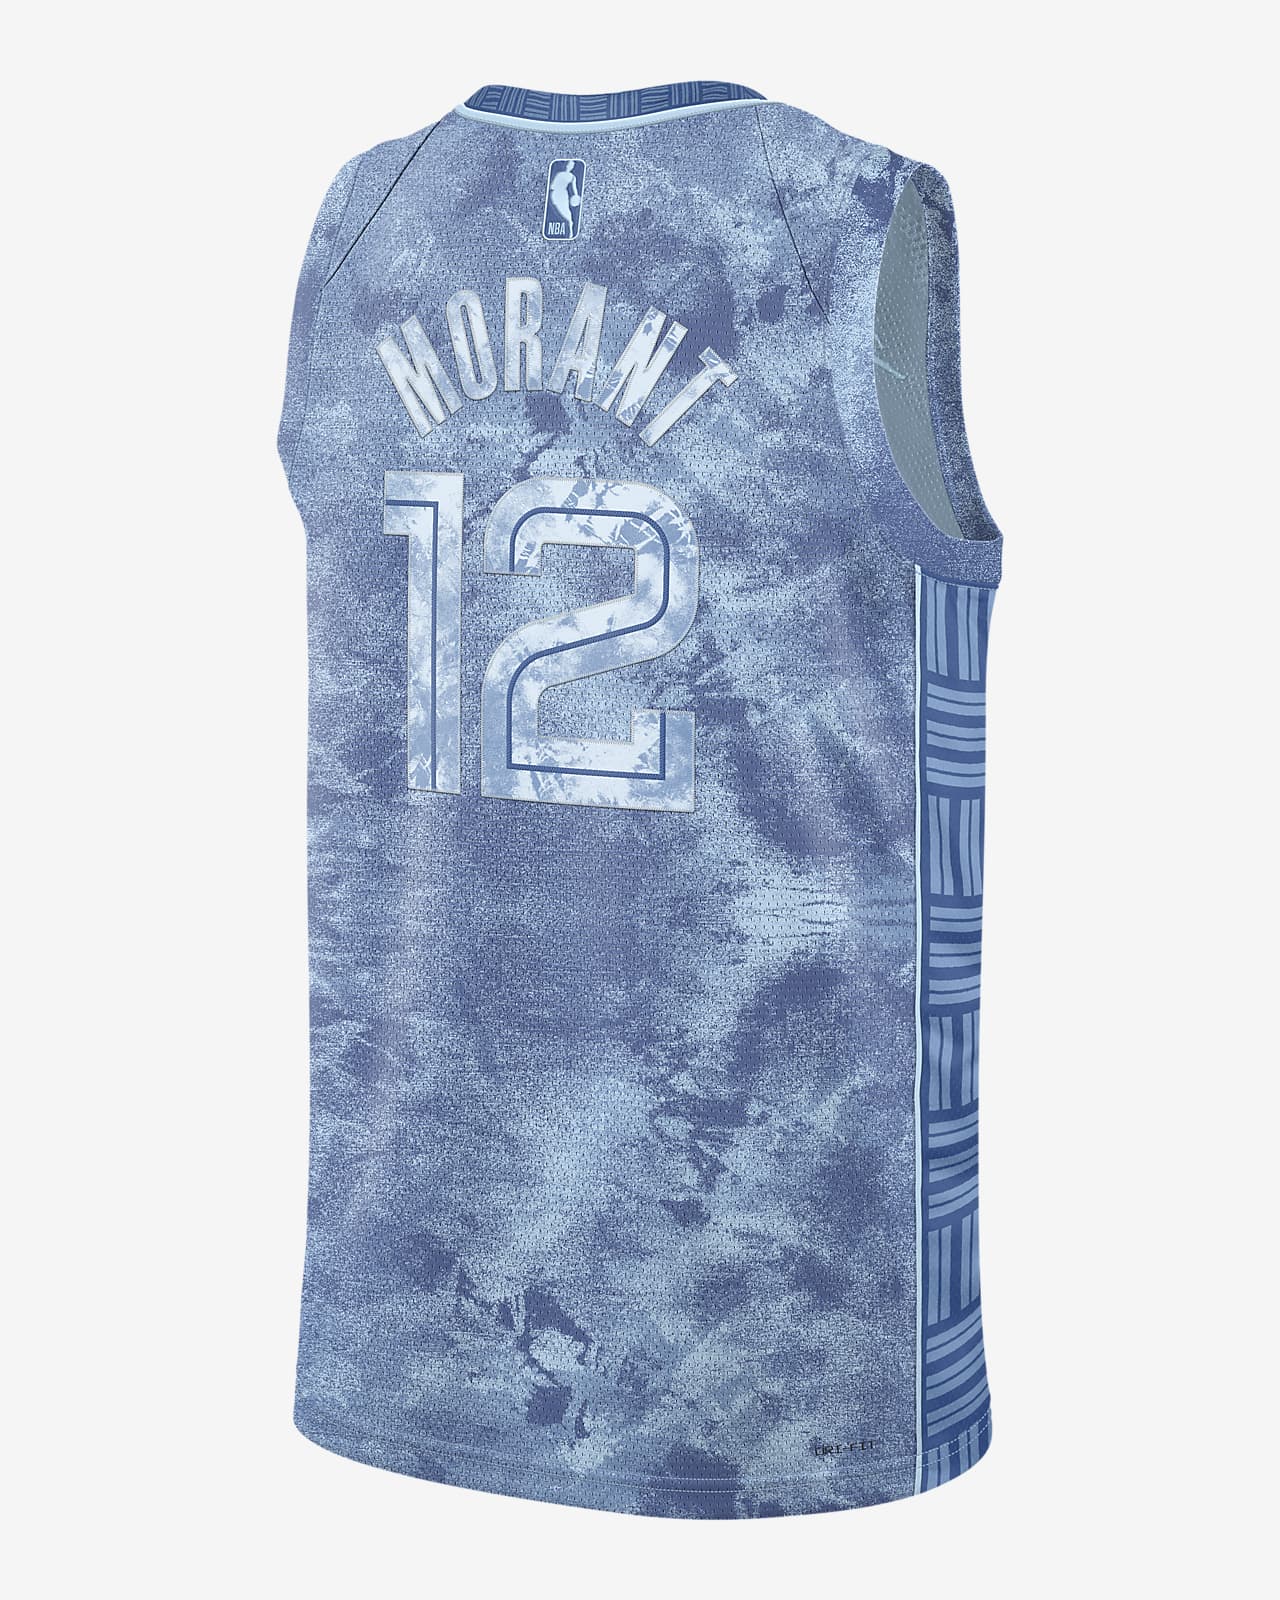 grizzlies home jersey